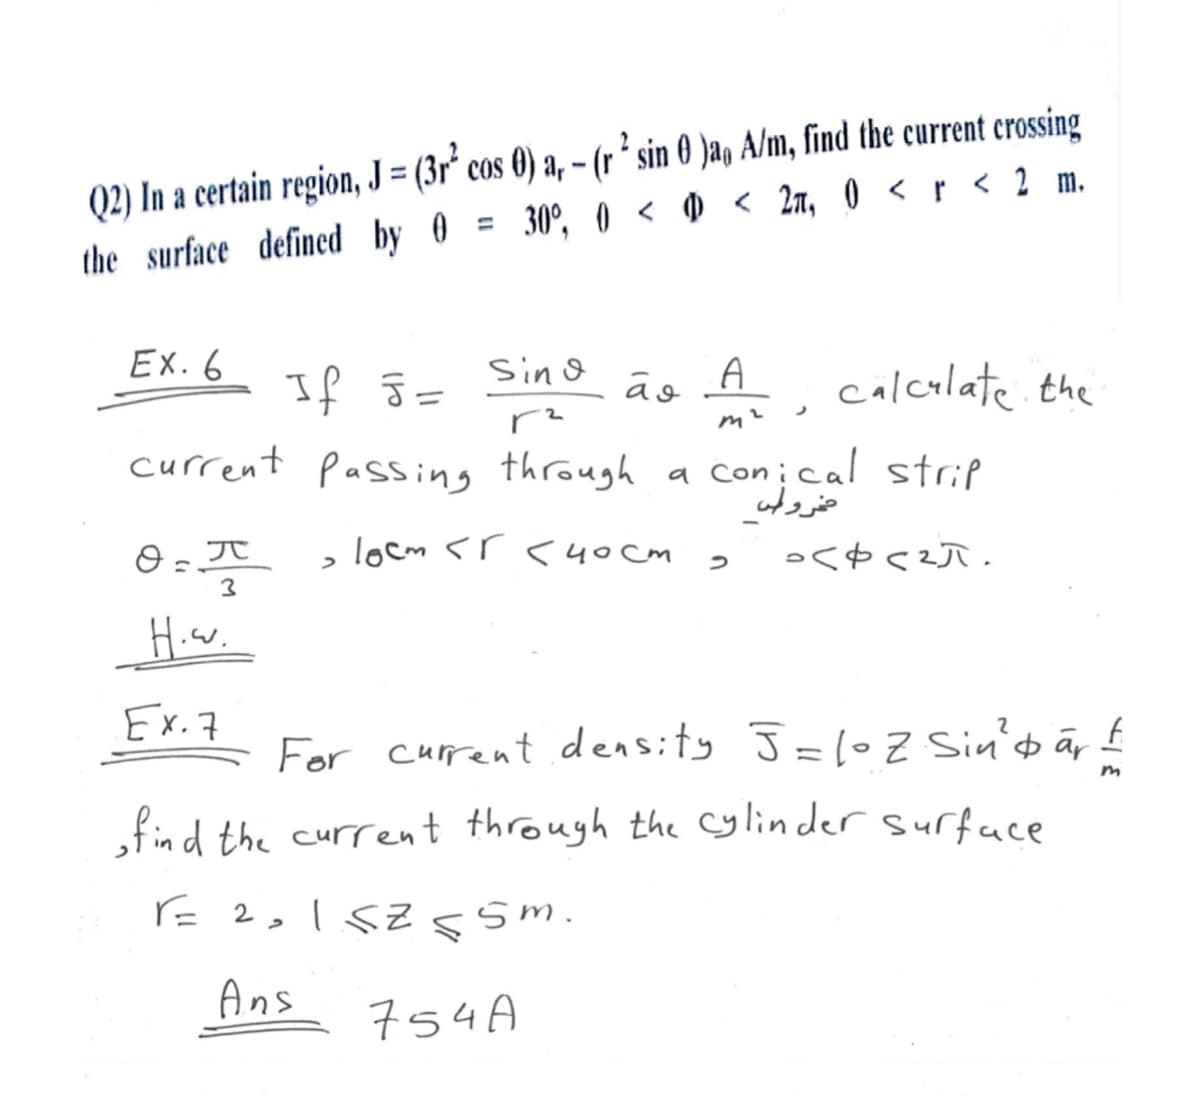 Q2) In a certain region, J = (3r² cos 0) a, - (r² sin 0 )a, A/m, find the current crossing
the surface defined by 0 = 30°, 0 < 0 < 2, 0 < r < 2 m.
Ex. 6
If J=
Sind
وة
A
calculate the
,
m²
a conical strip
current Passing through a con
مخروط
2
H..
>
locm <r<40cm
3
<<²π.
Ex. 7
For current density J = 10 Z Sin² &ār ±
find the current through the cylinder surface
F= 2,1.5Z ≤5m.
Ans
754A